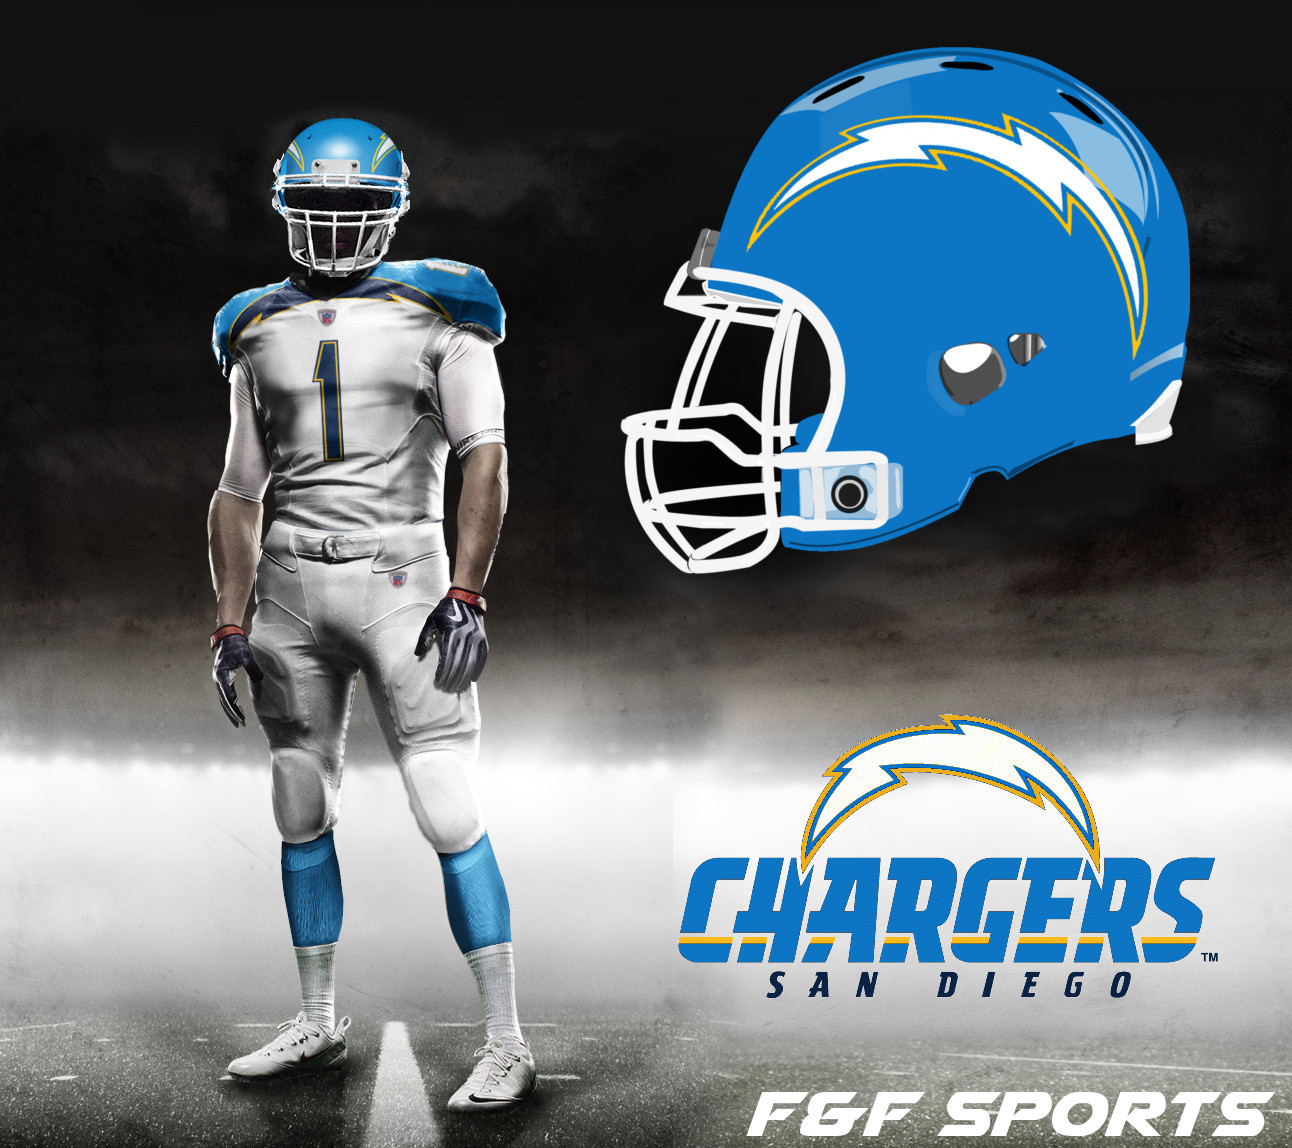 chargers-concept-away-2.jpg